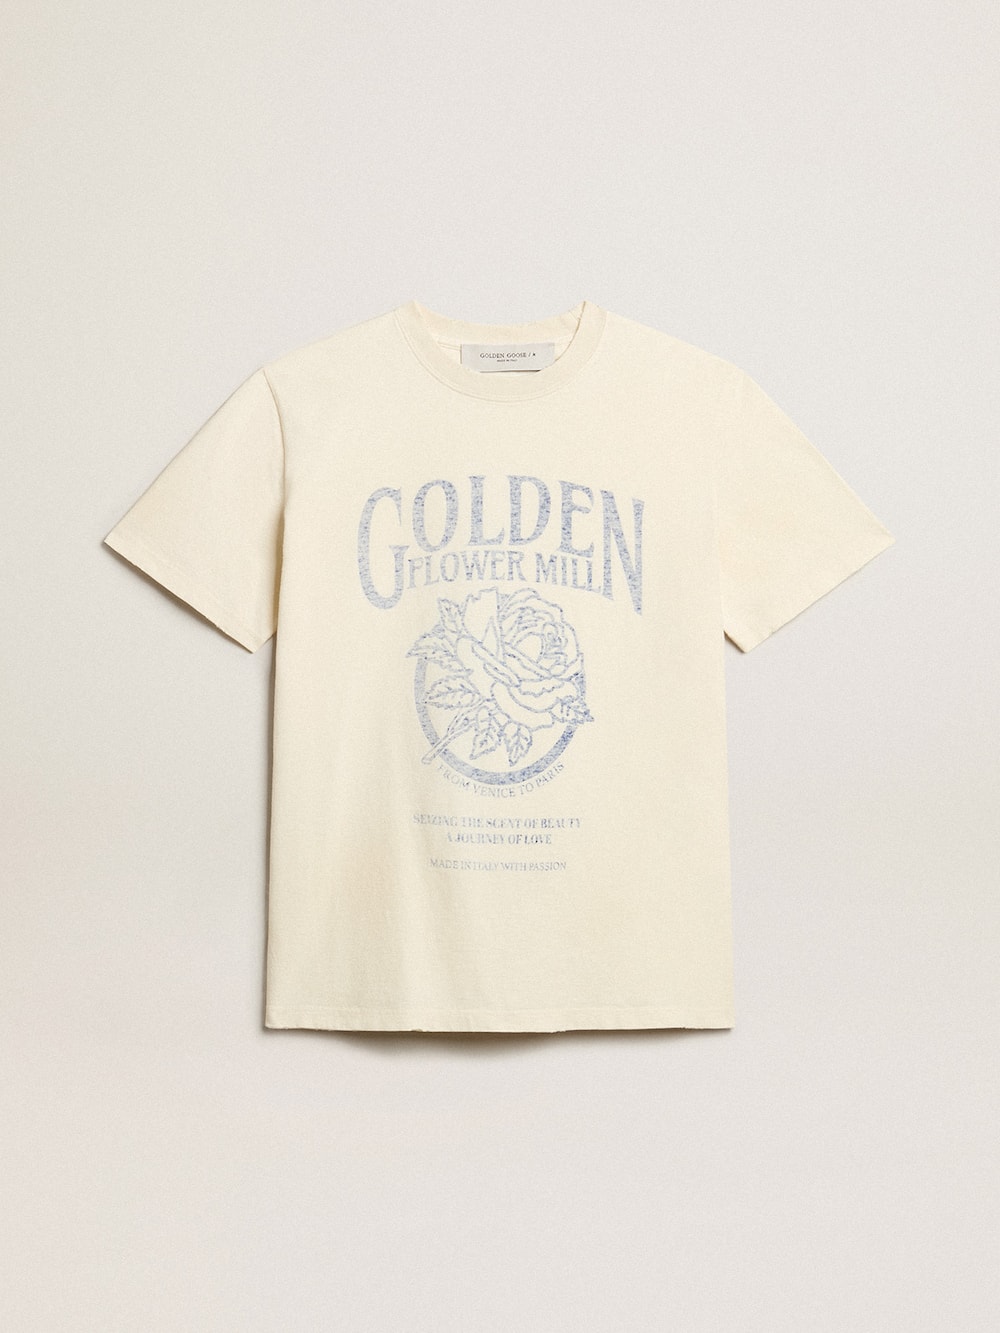 Golden Goose - Women’s T-shirt in aged white cotton with seasonal print in 